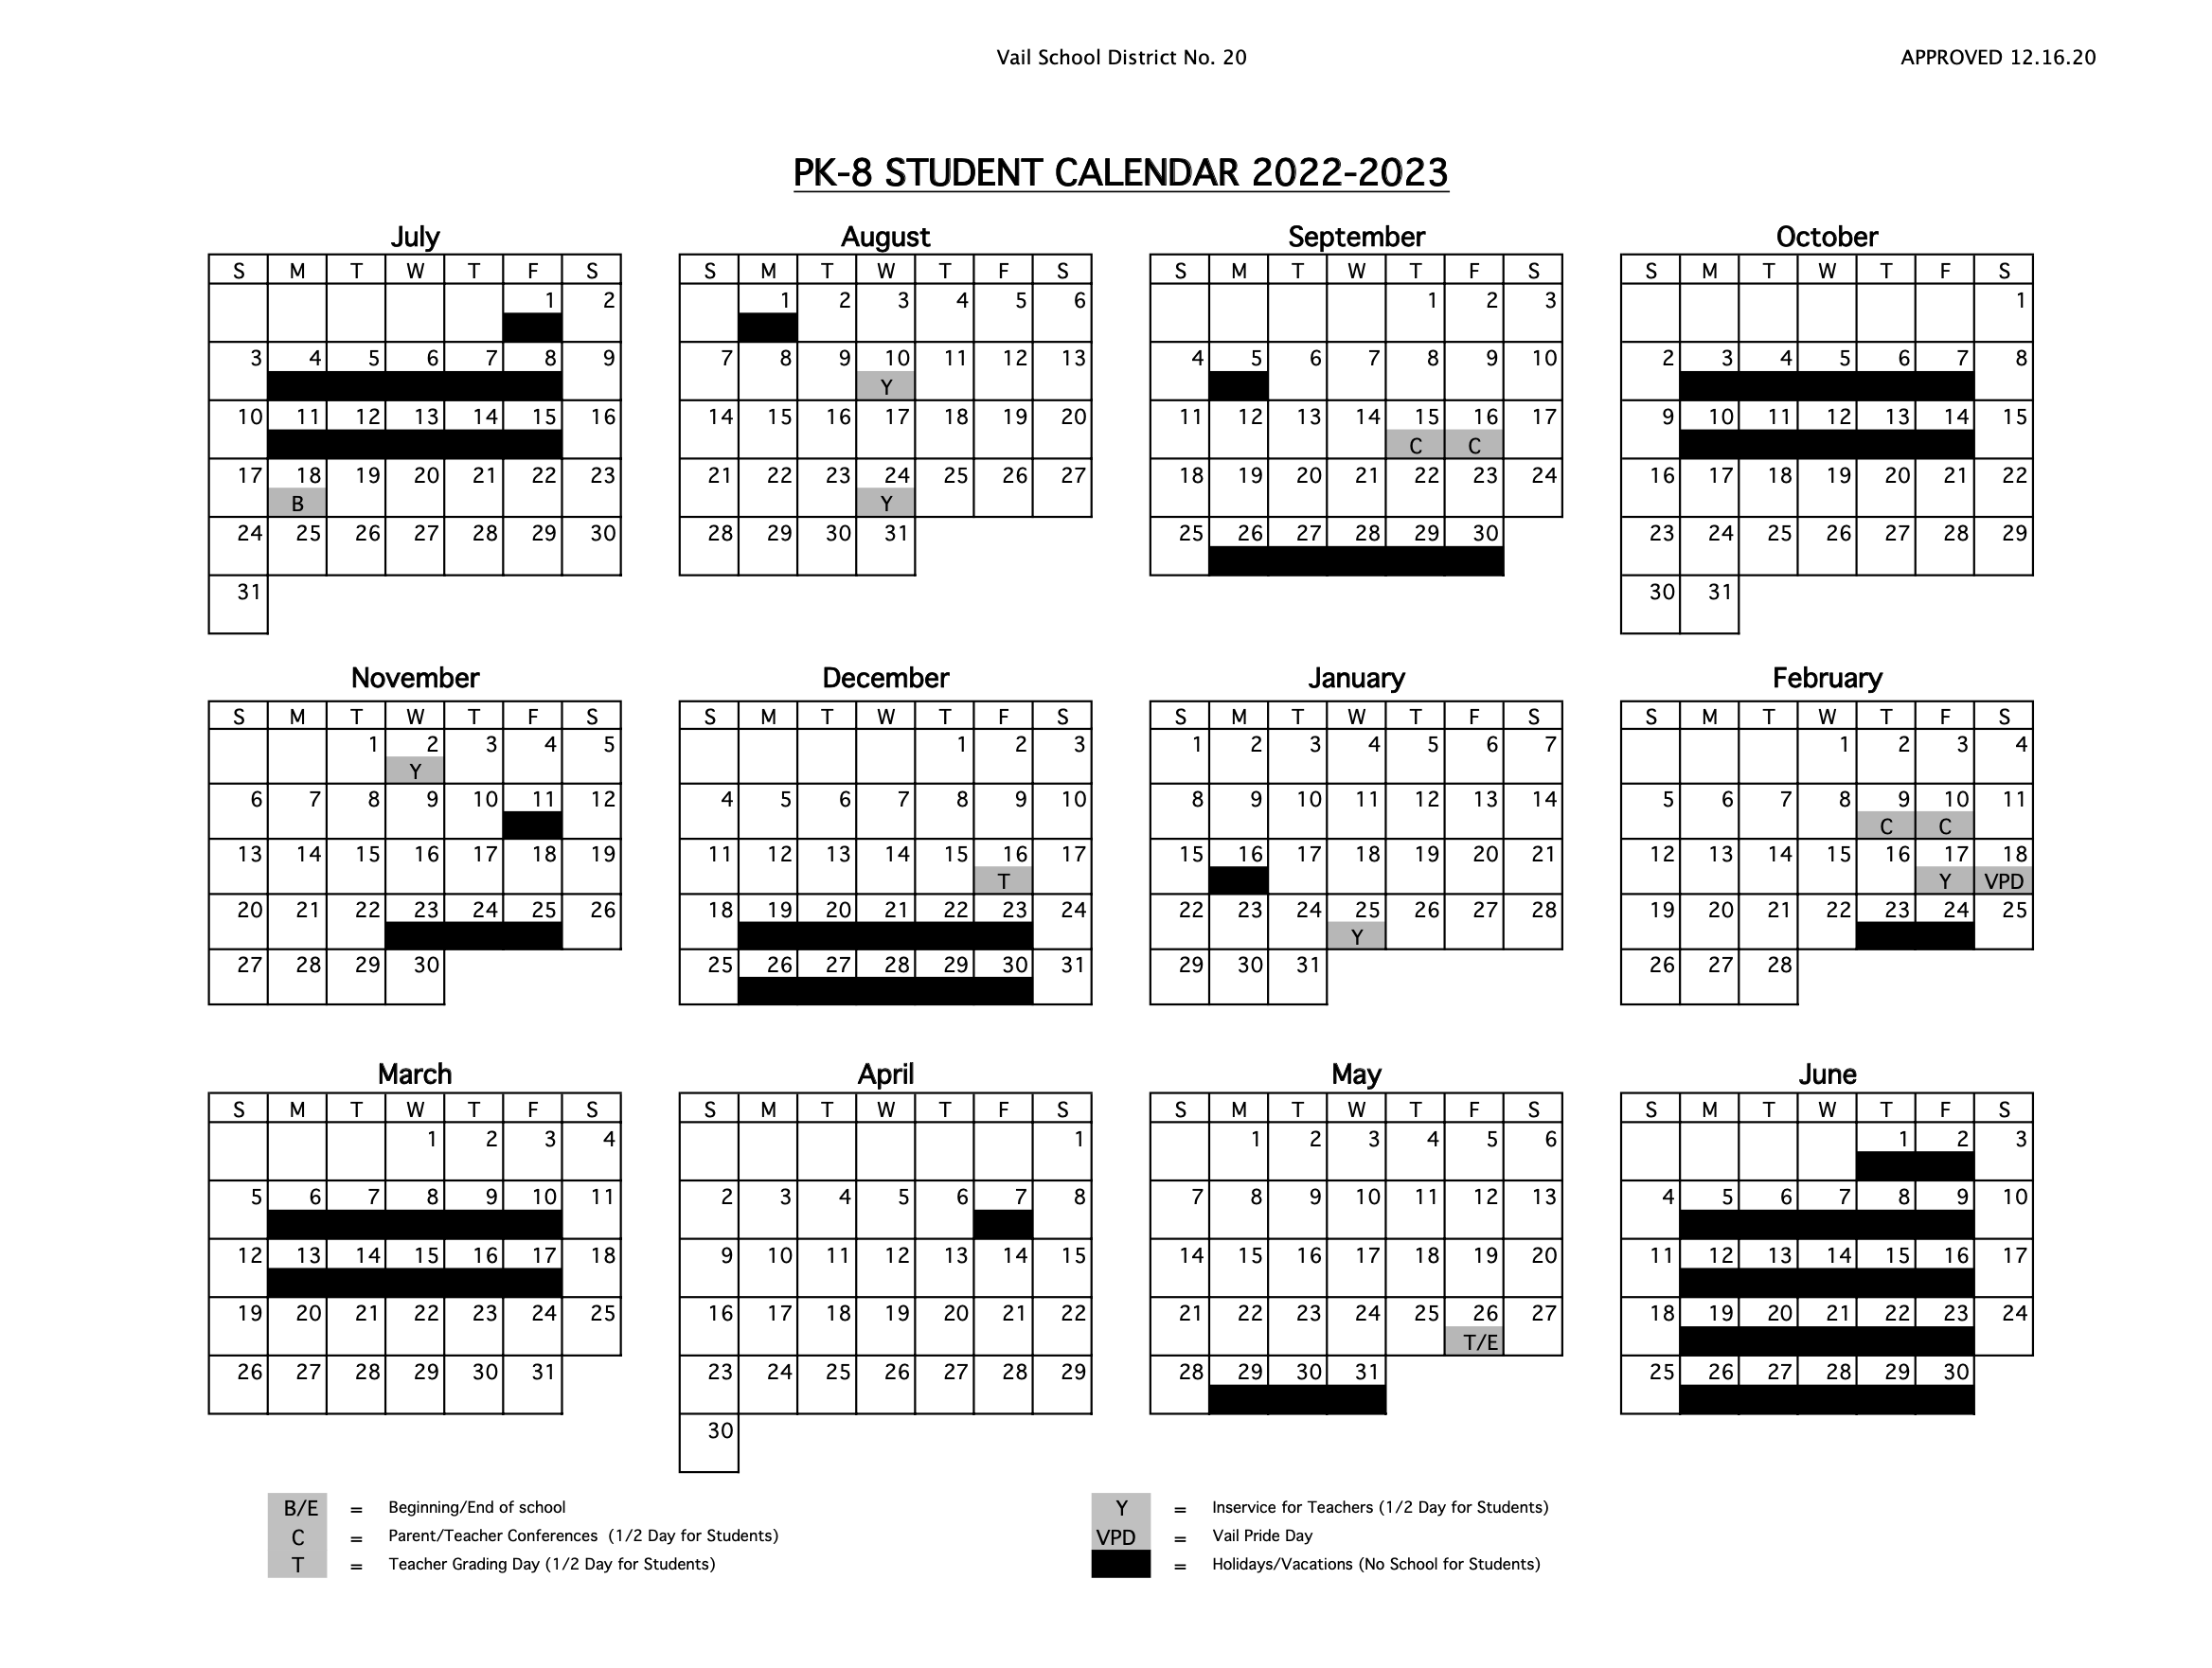 2025-2026-school-year-one-page-calendar-enchanted-learning